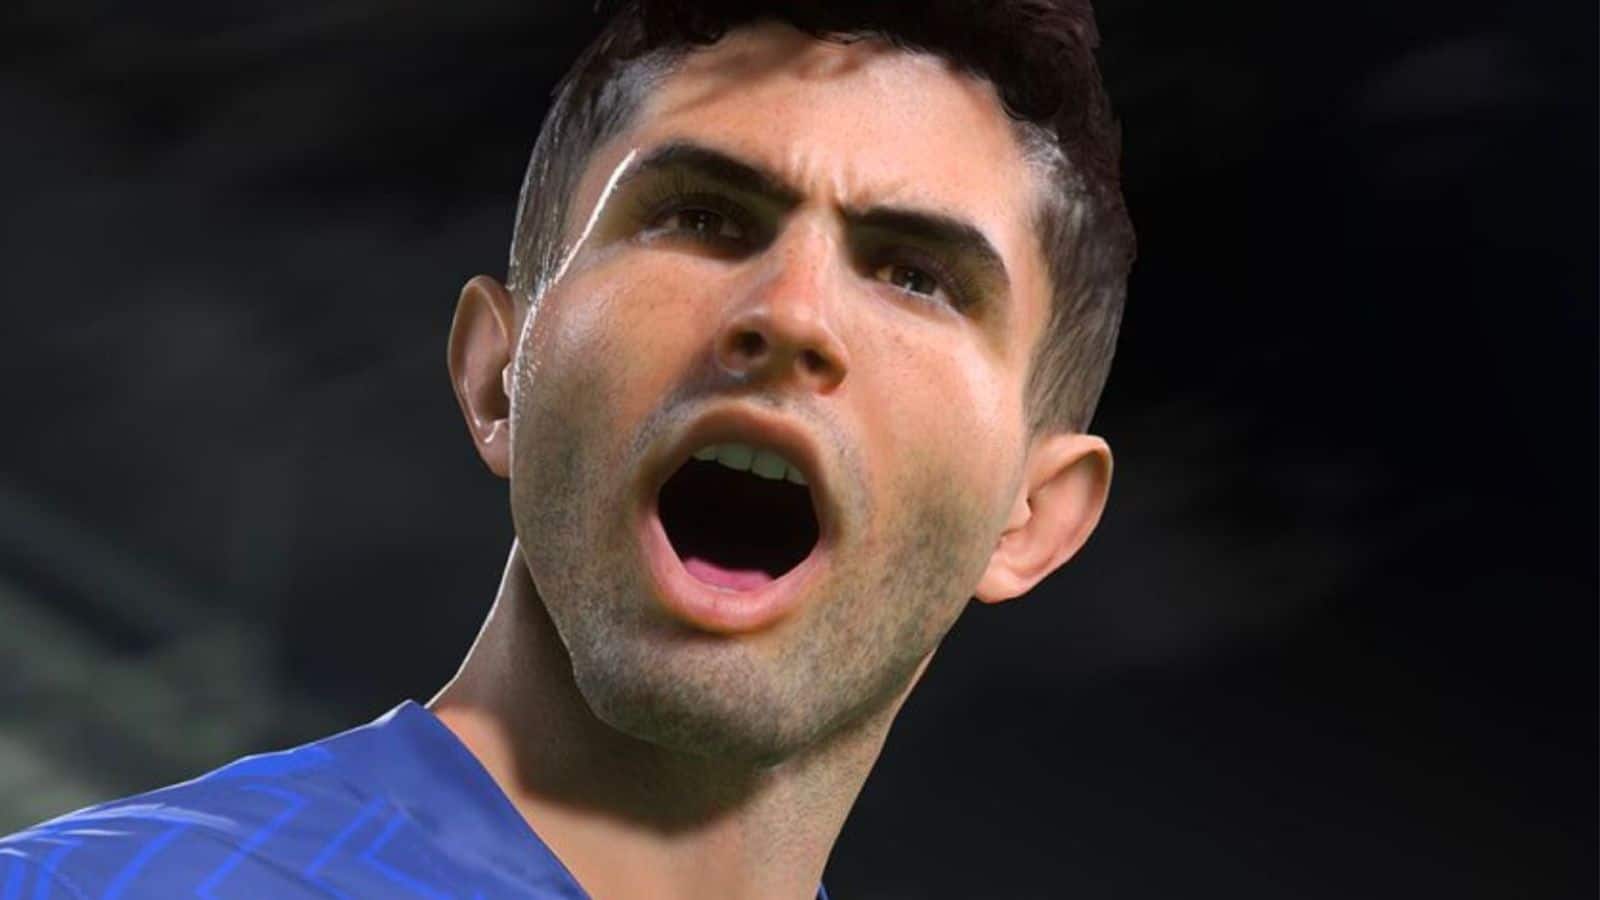 FIFA 23 players are already obsessed with Pulisic’s ‘Griddy’ celebration